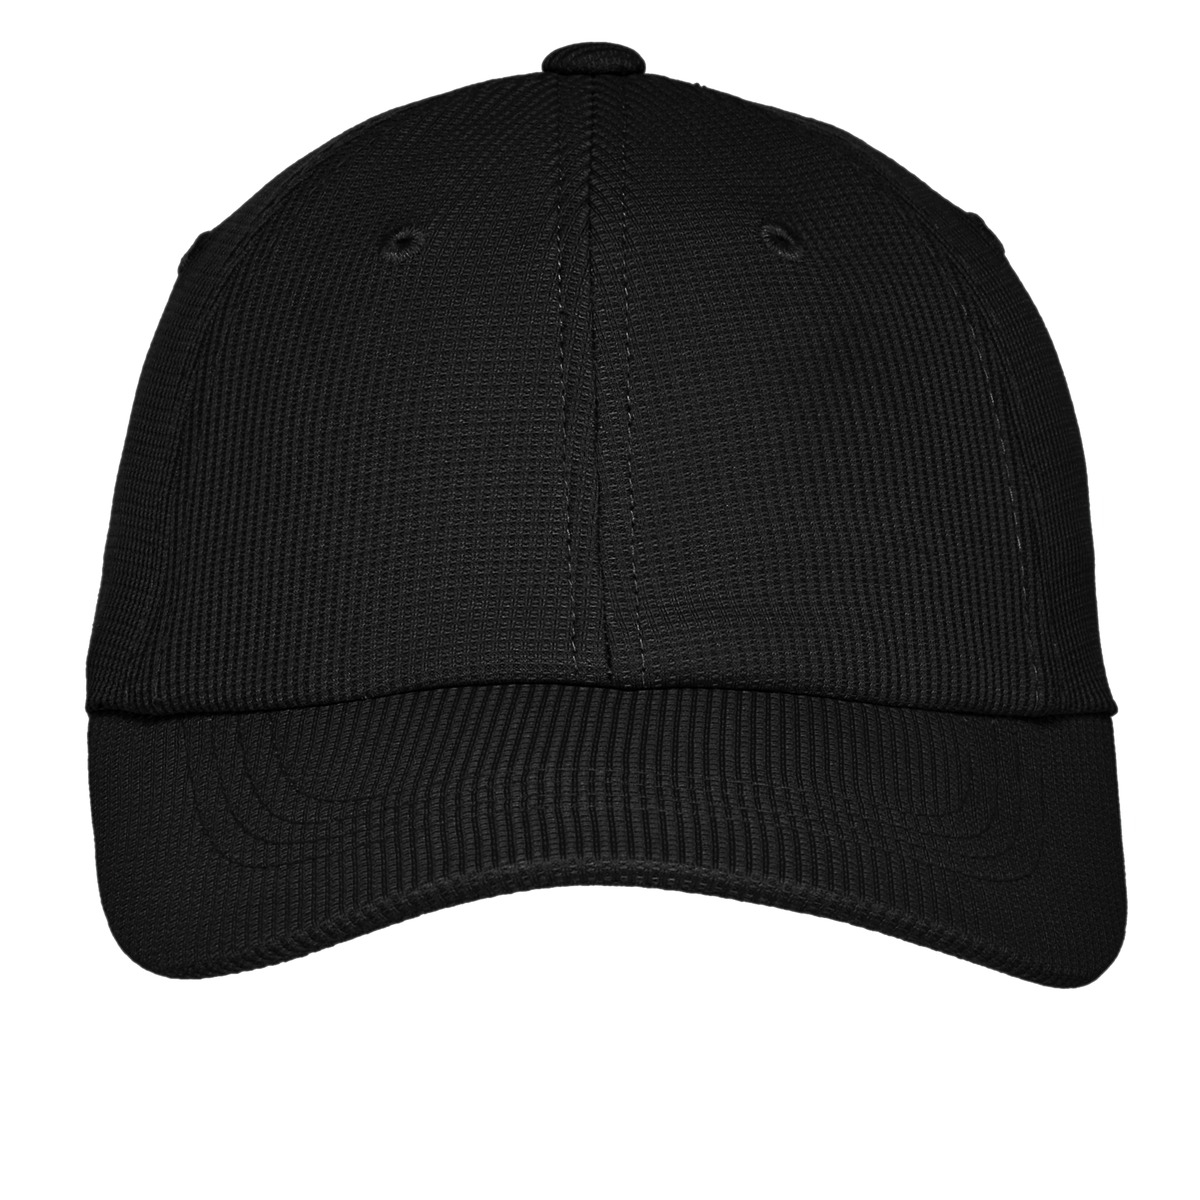 Port Authority ® Cool Release ® Cap. C874 | Colman and Company